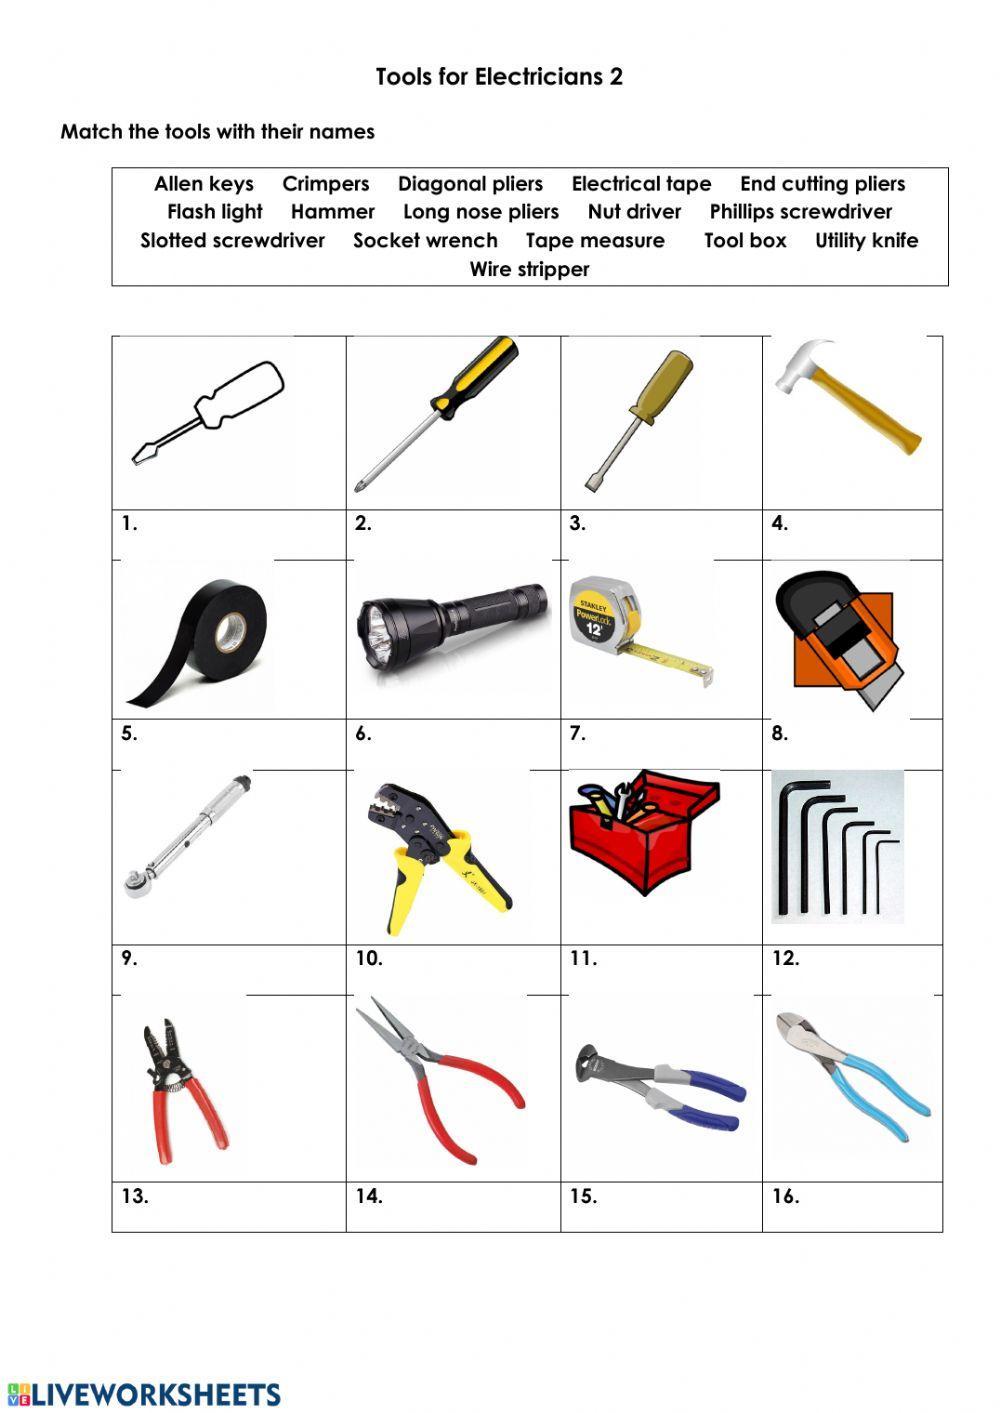 Tools for Electricians 2